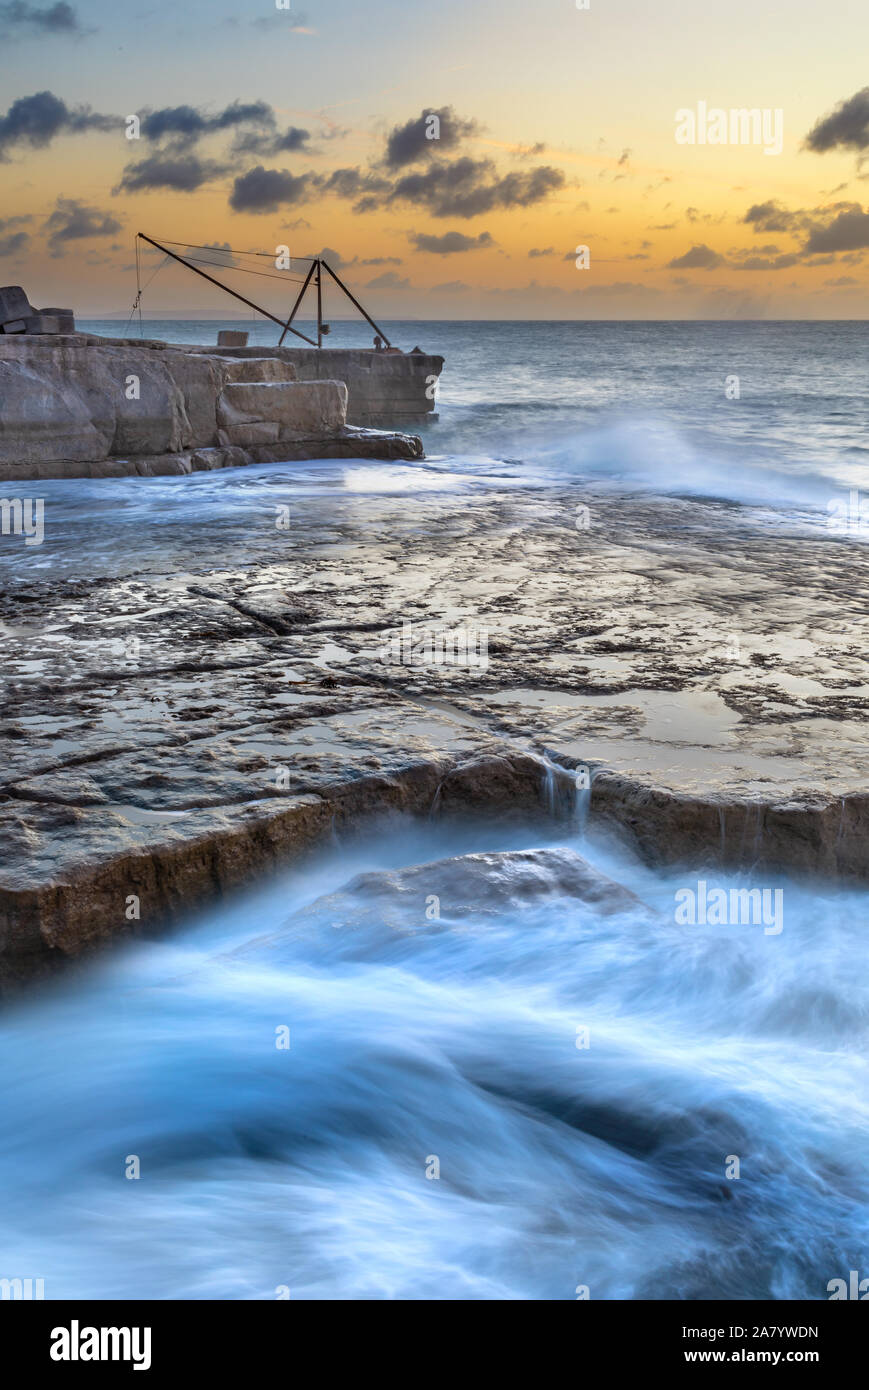 Portland Bill Dorset England Waves breaking on the rocks at Portland Bill, at low tide during stormy weather. Stock Photo